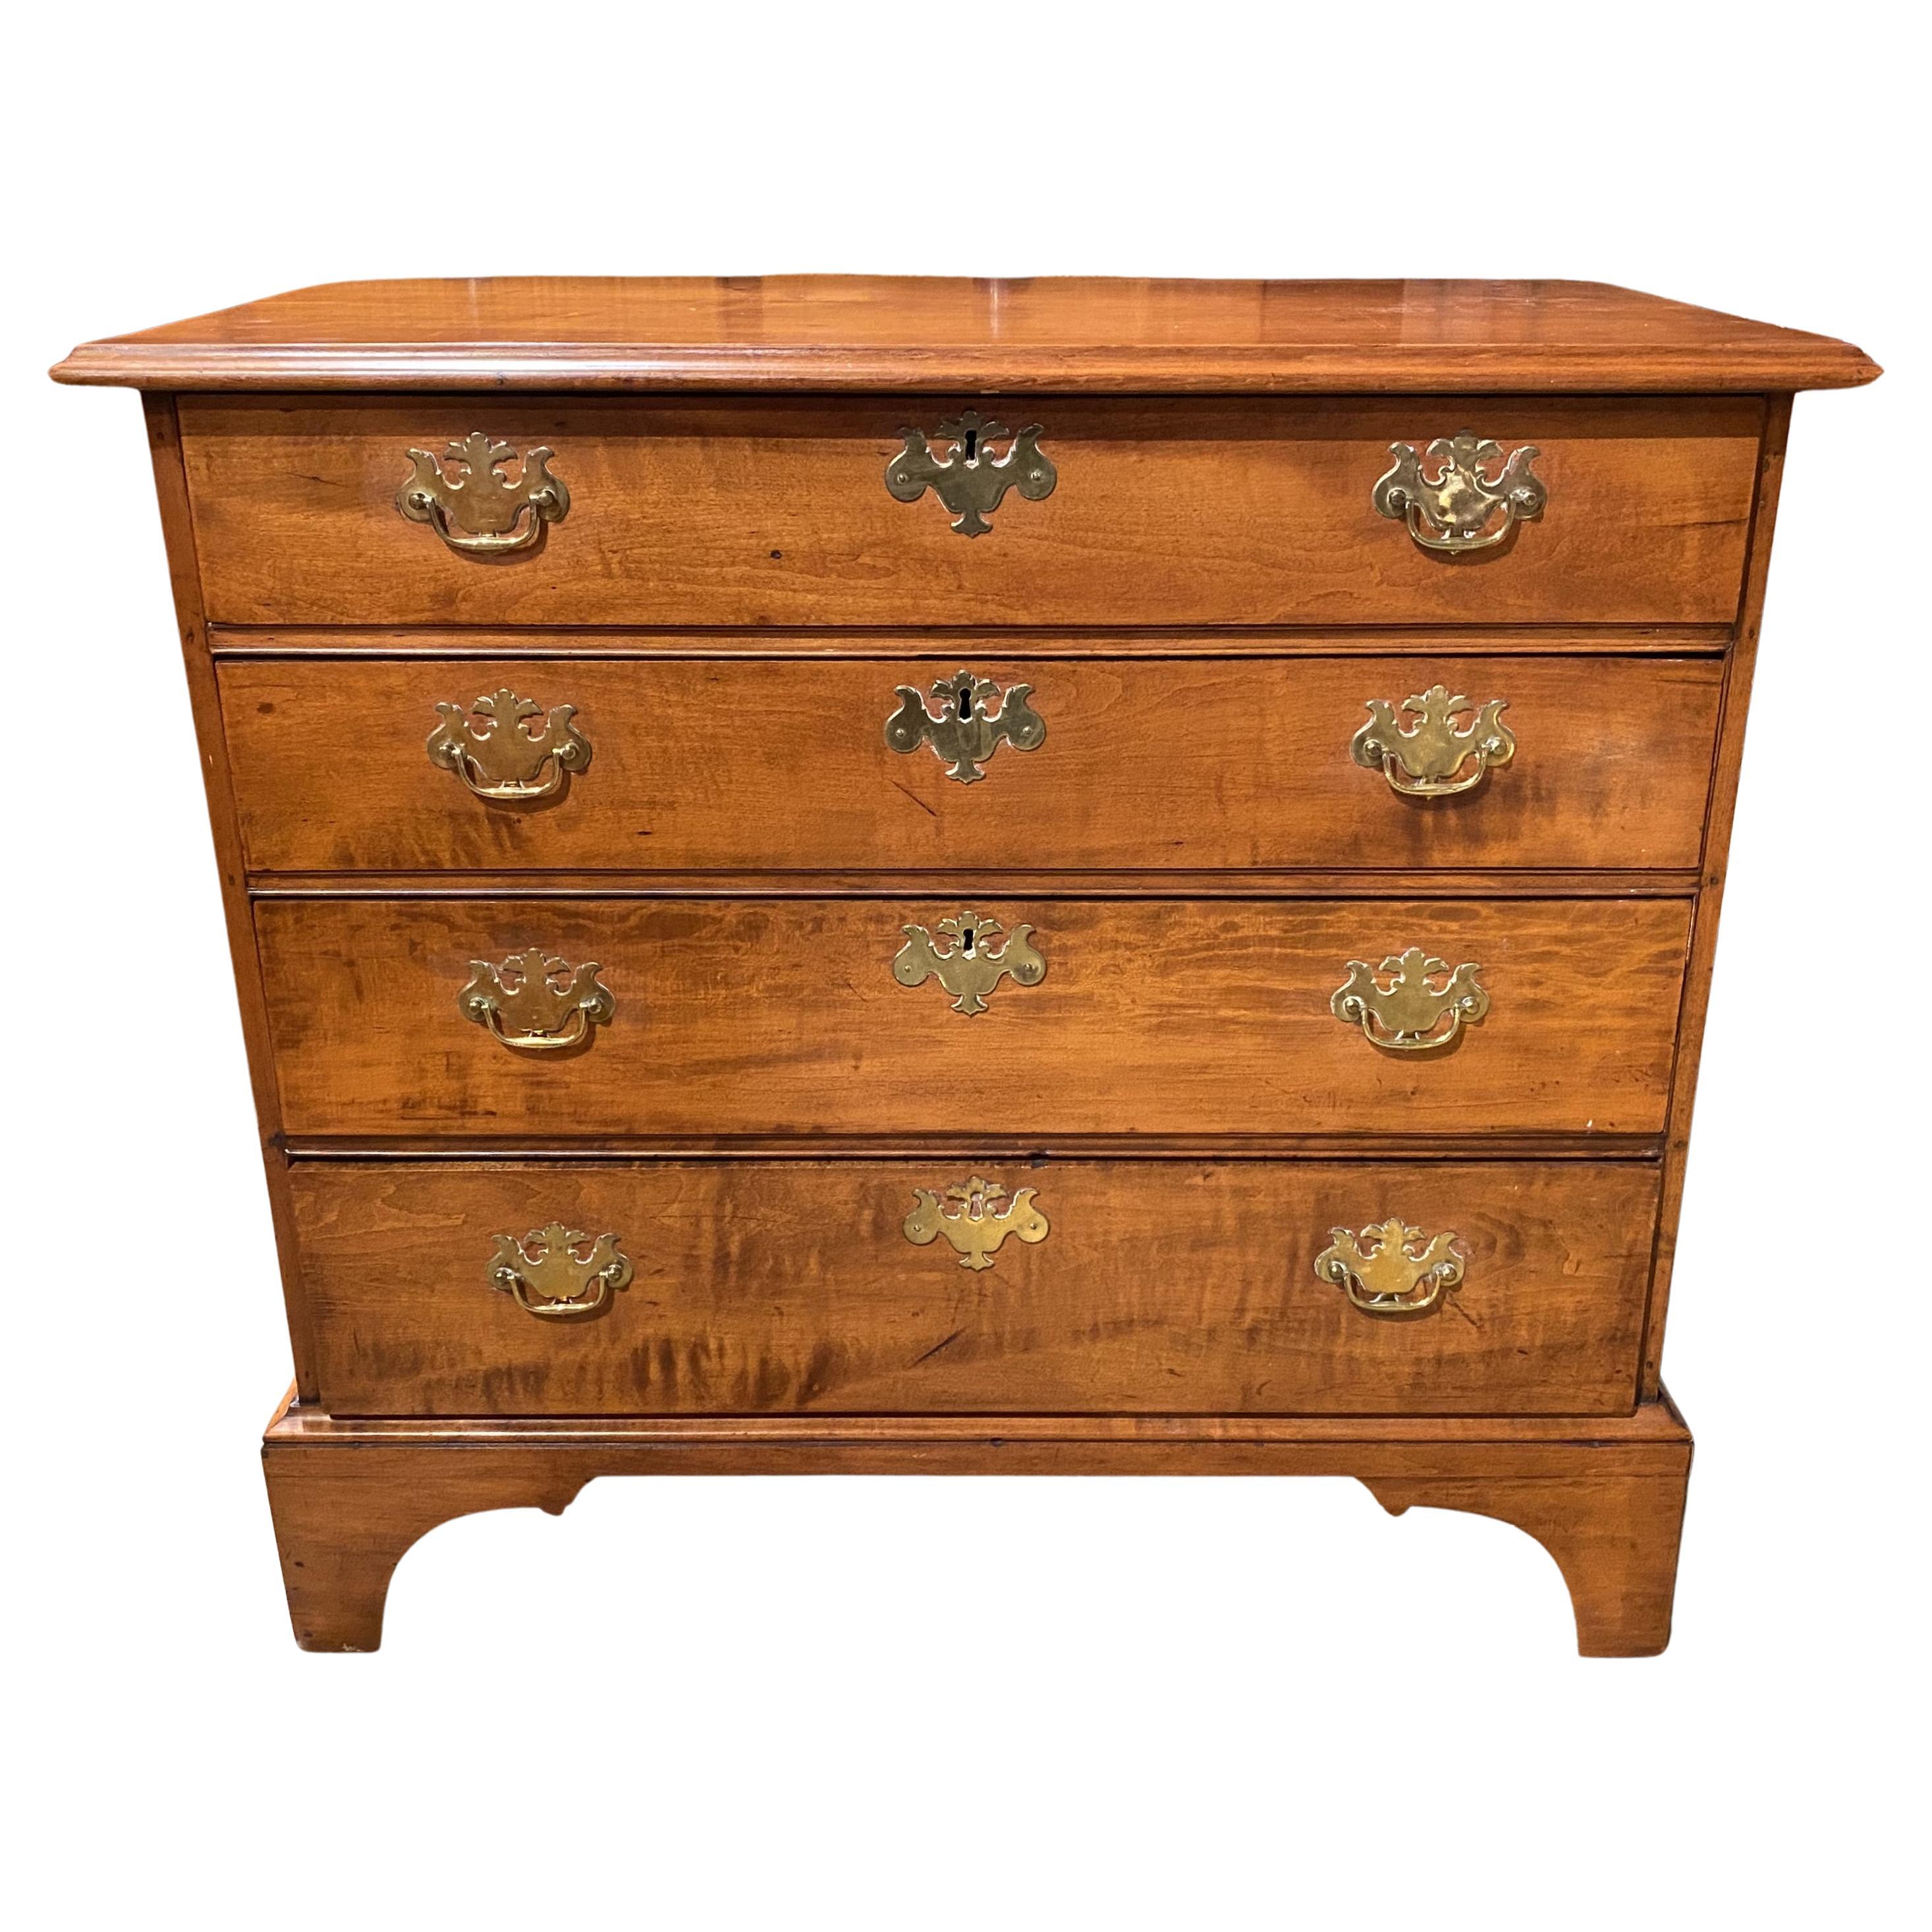 18th Century New England Chippendale Chest of Drawers in Maple and Tiger Maple